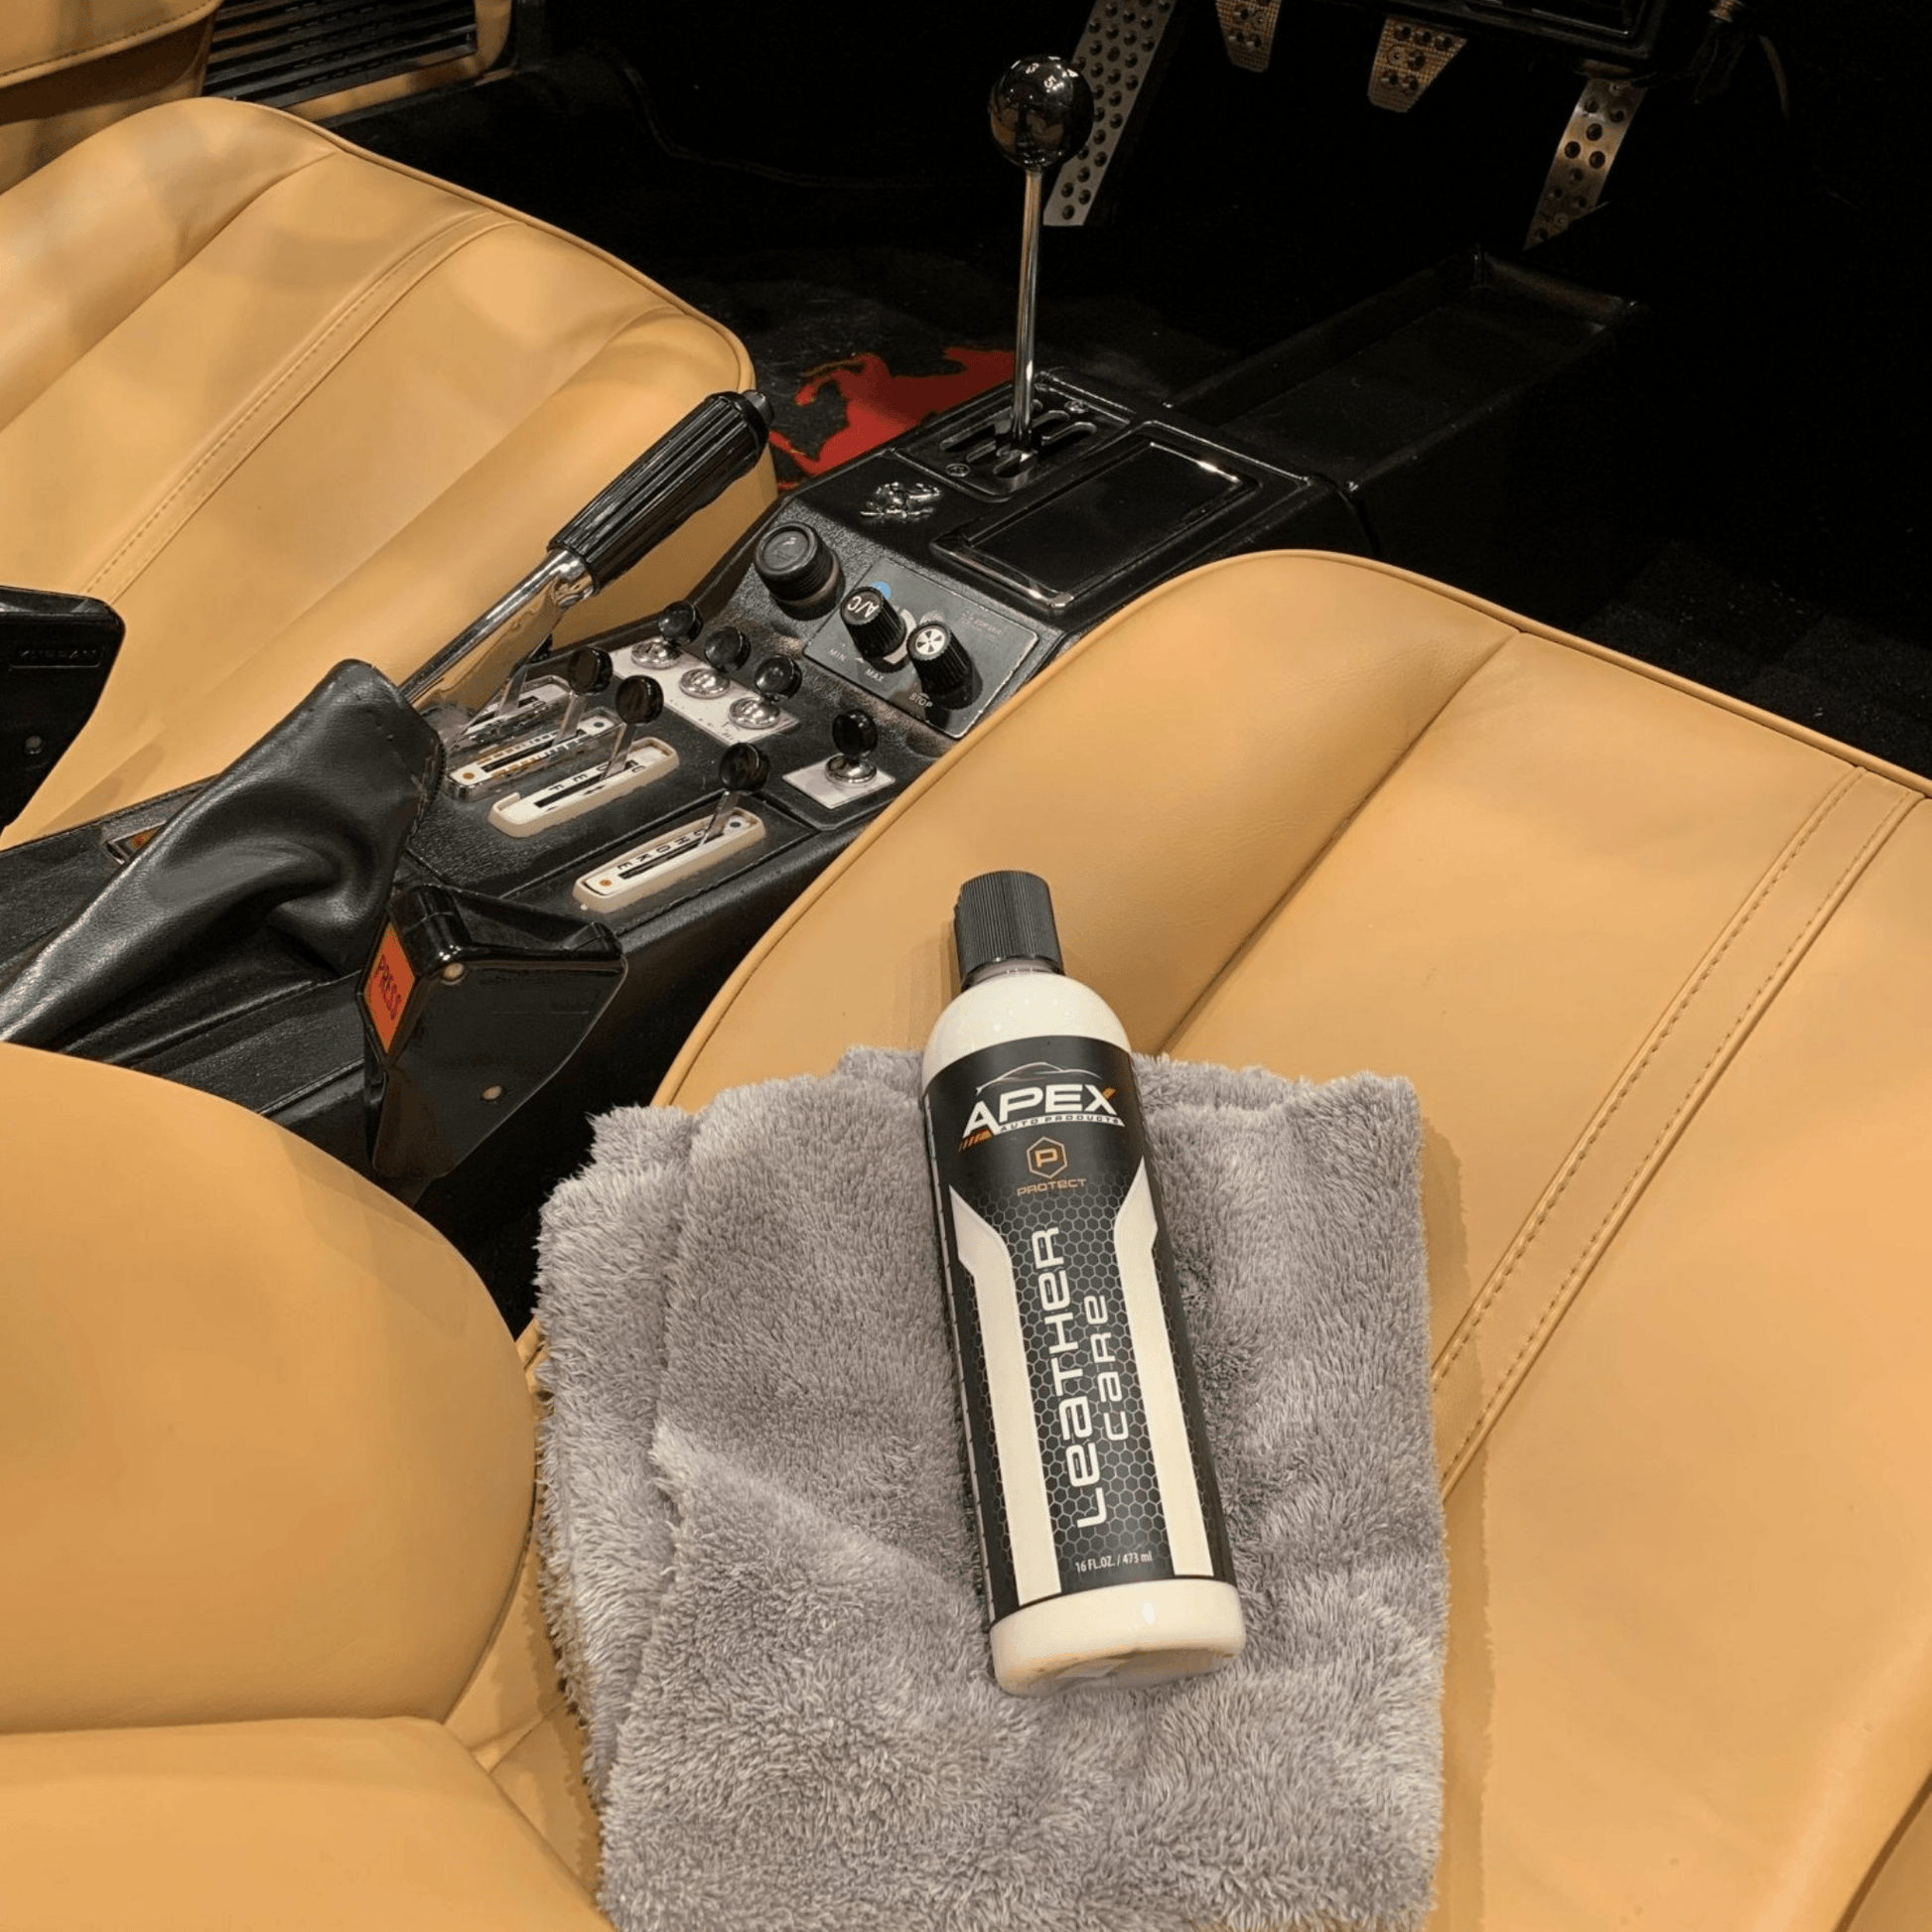 Car Leather Conditioner Leather Cleaning Foam Spray 473ml Car Leather  Cleaner Spray Leather Care Spray For Car Seats Shoes Cars - AliExpress